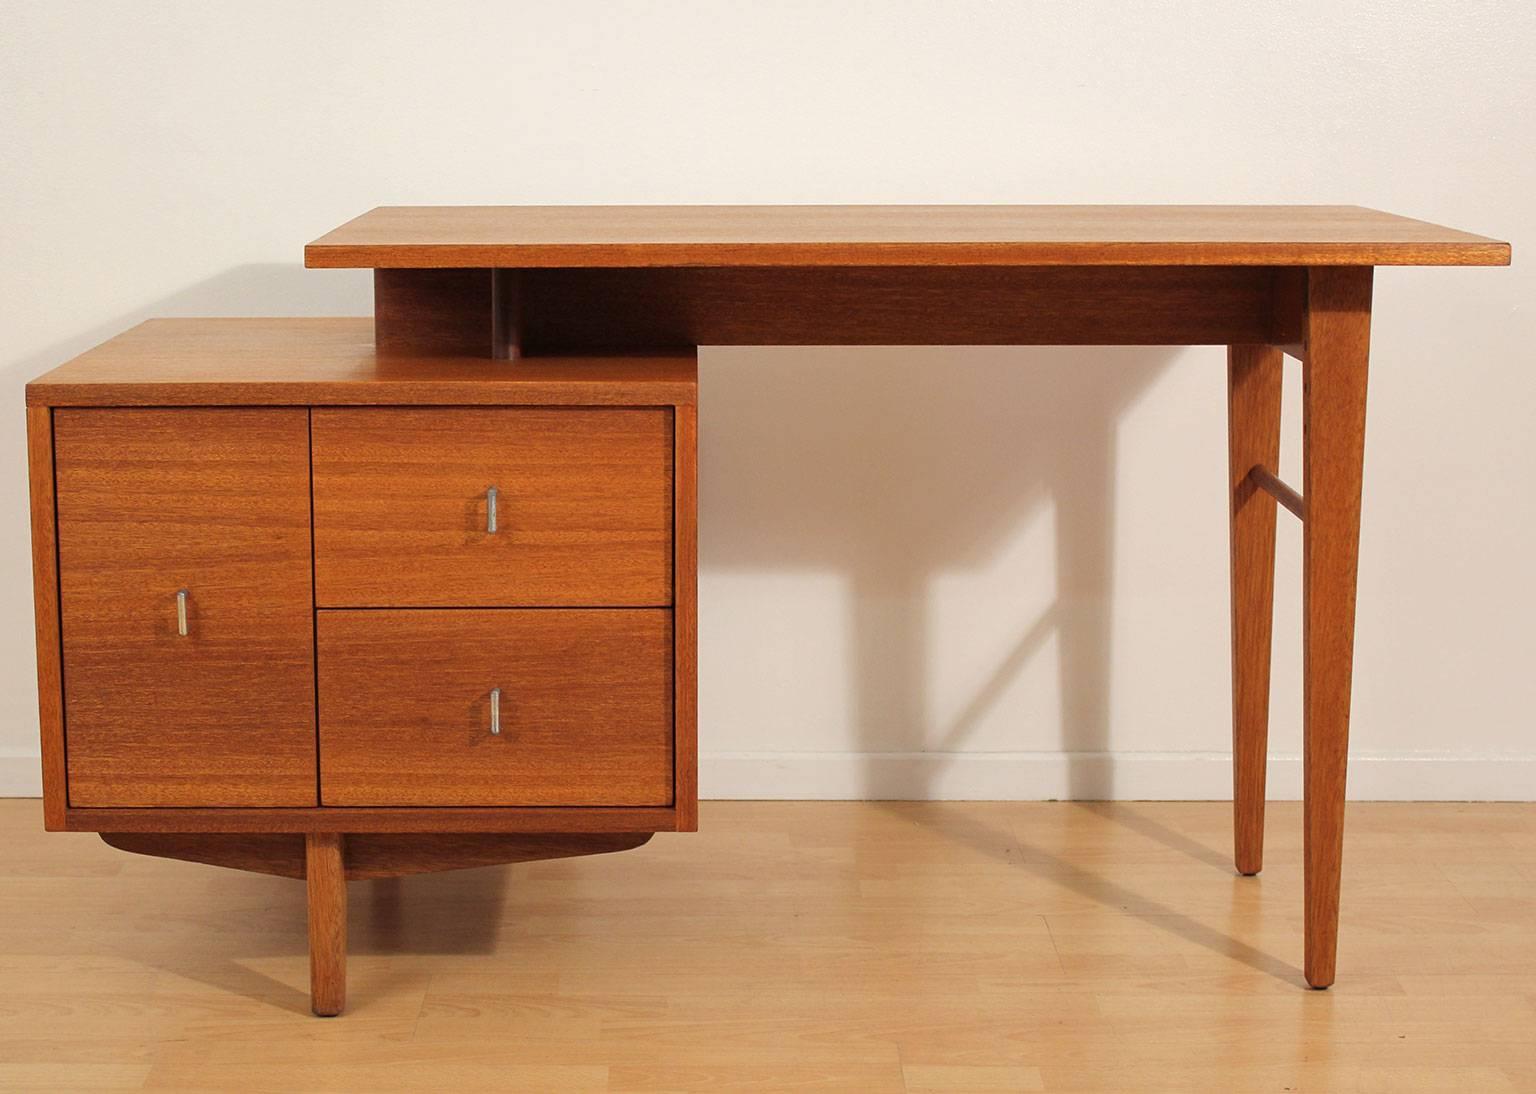 Early Brown Saltman desk designed by John Keal, circa 1950s. Made of beautiful mahogany wood. Has an opening in the front for books and makes this desk great floating. Awesome design. Wood is completely restored to original condition. Total length